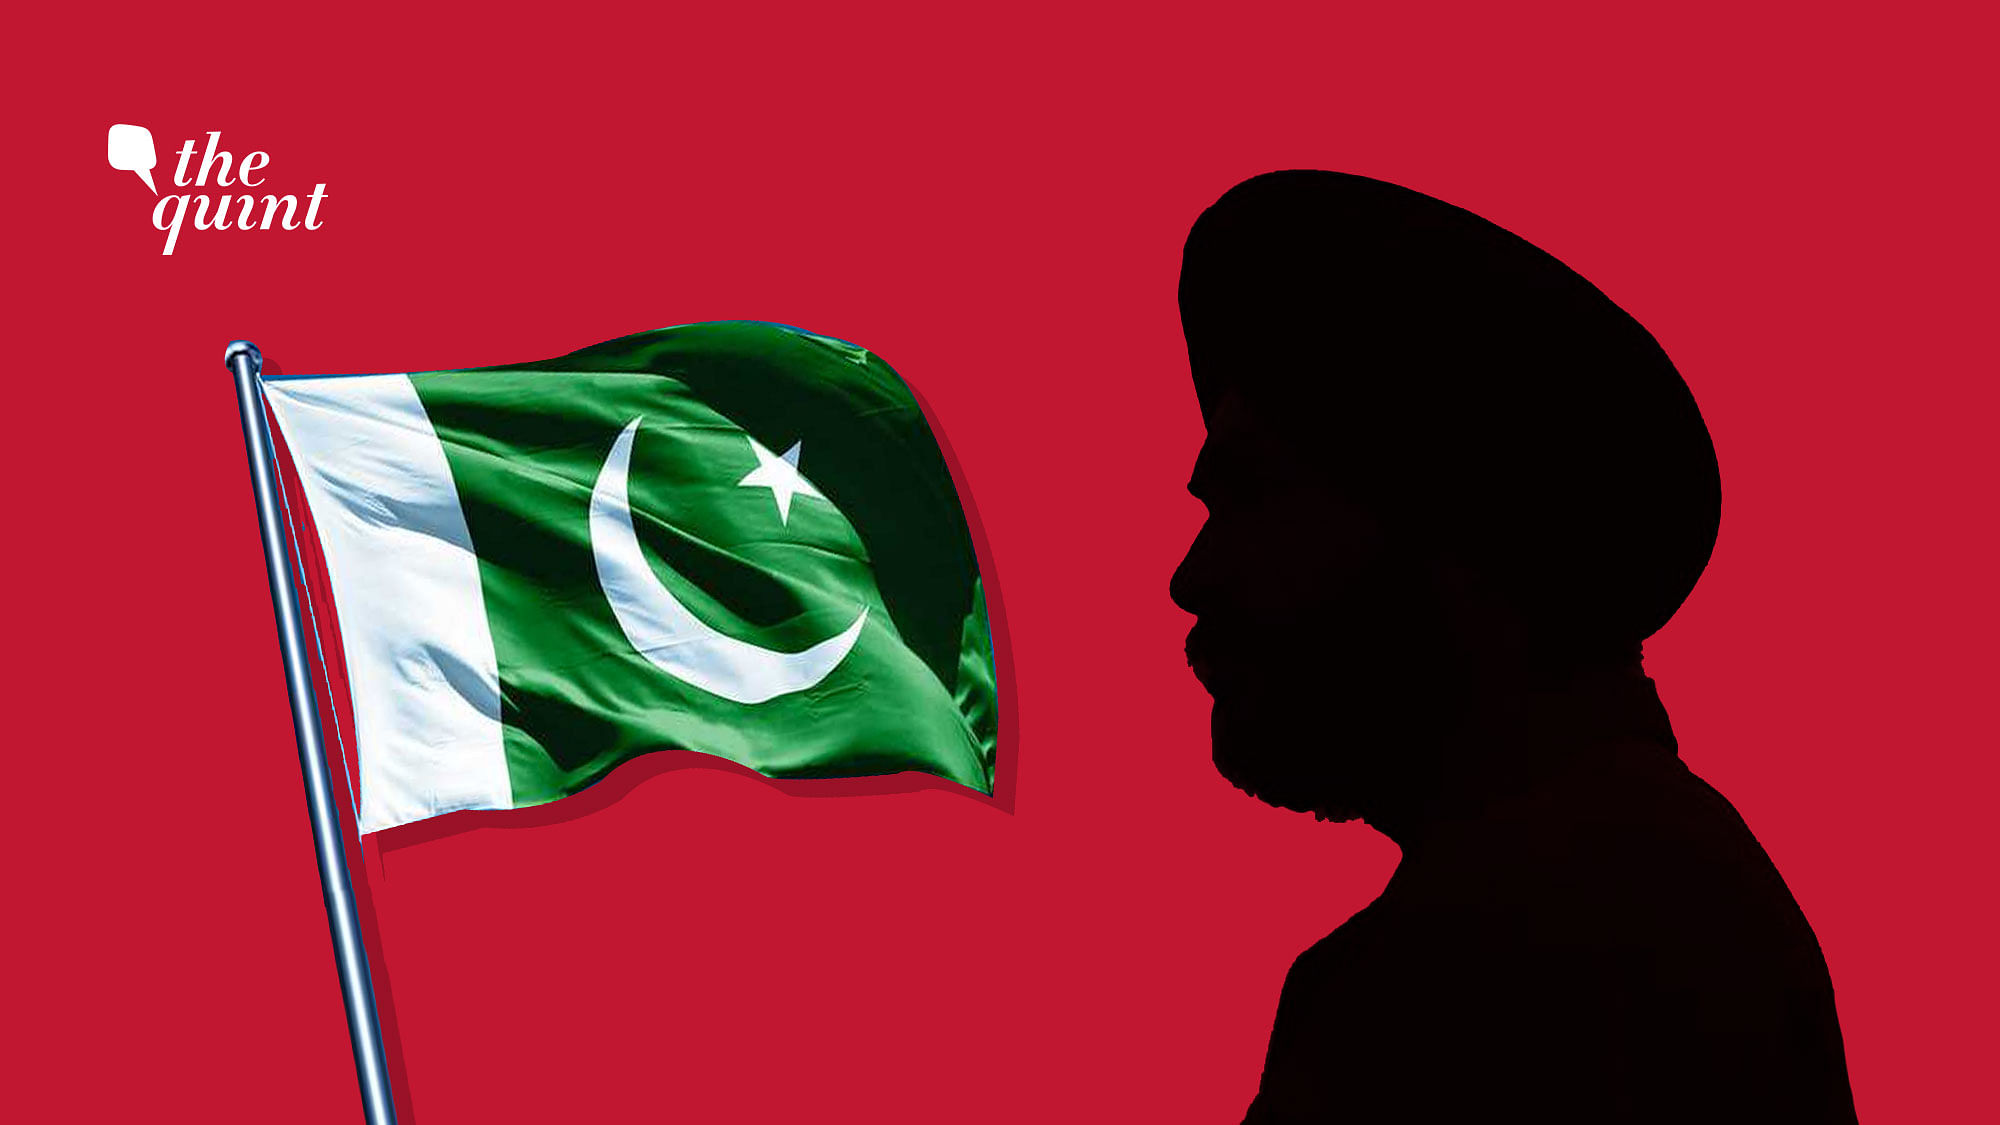 Image of Pakistani flag and silhouette of a Sikh man used for representational purposes.